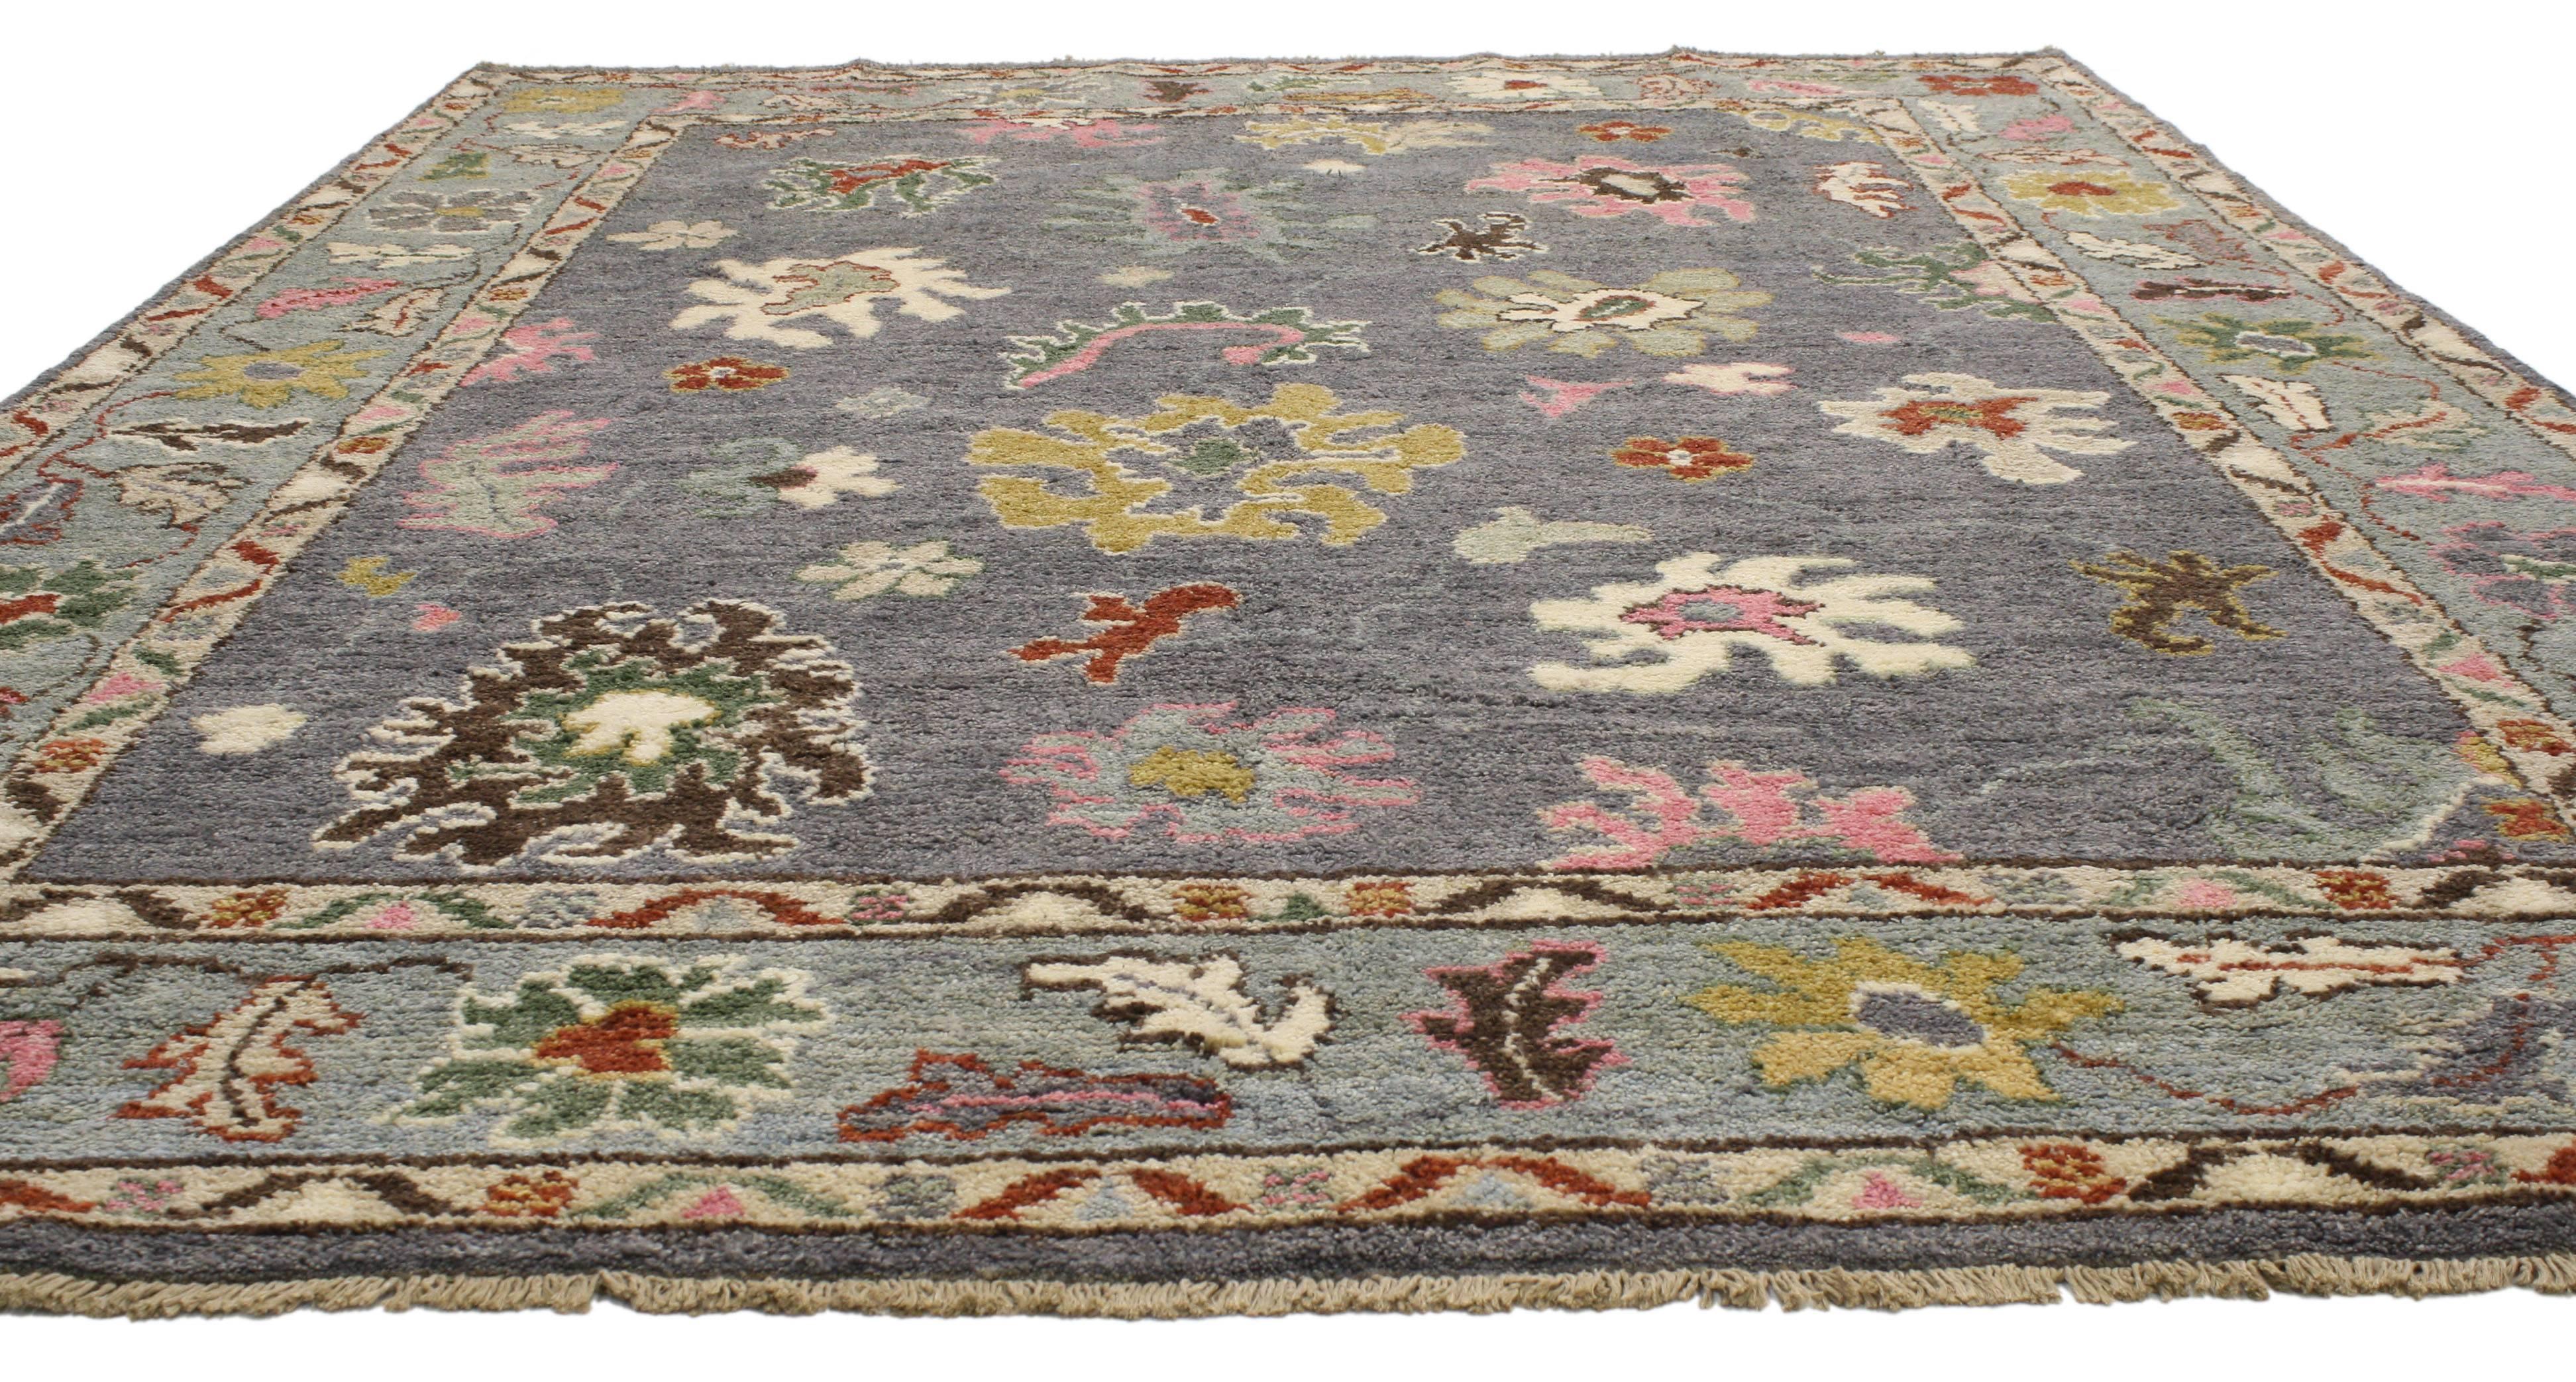 80402 New Contemporary Oushak Area Rug with Memphis Design and Postmodern Luxe Style. This hand knotted wool contemporary Oushak area rug features an all-over colorful geometric pattern composed of Harshang-style motifs, palmettes, flowers, organic